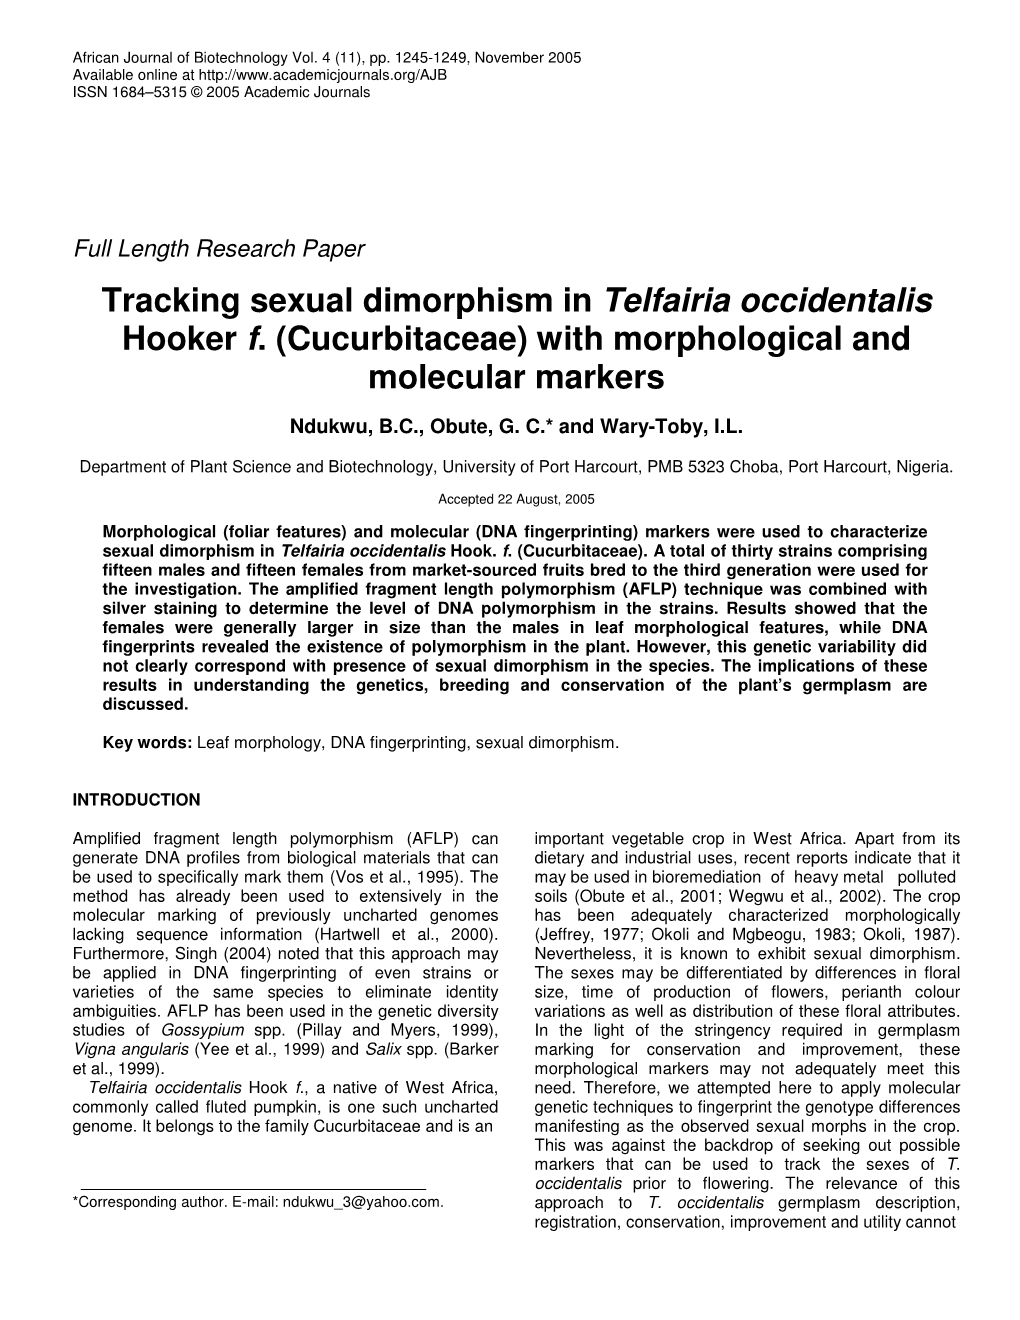 Tracking Sexual Dimorphism in Telfairia Occidentalis Hooker F. (Cucurbitaceae) with Morphological and Molecular Markers